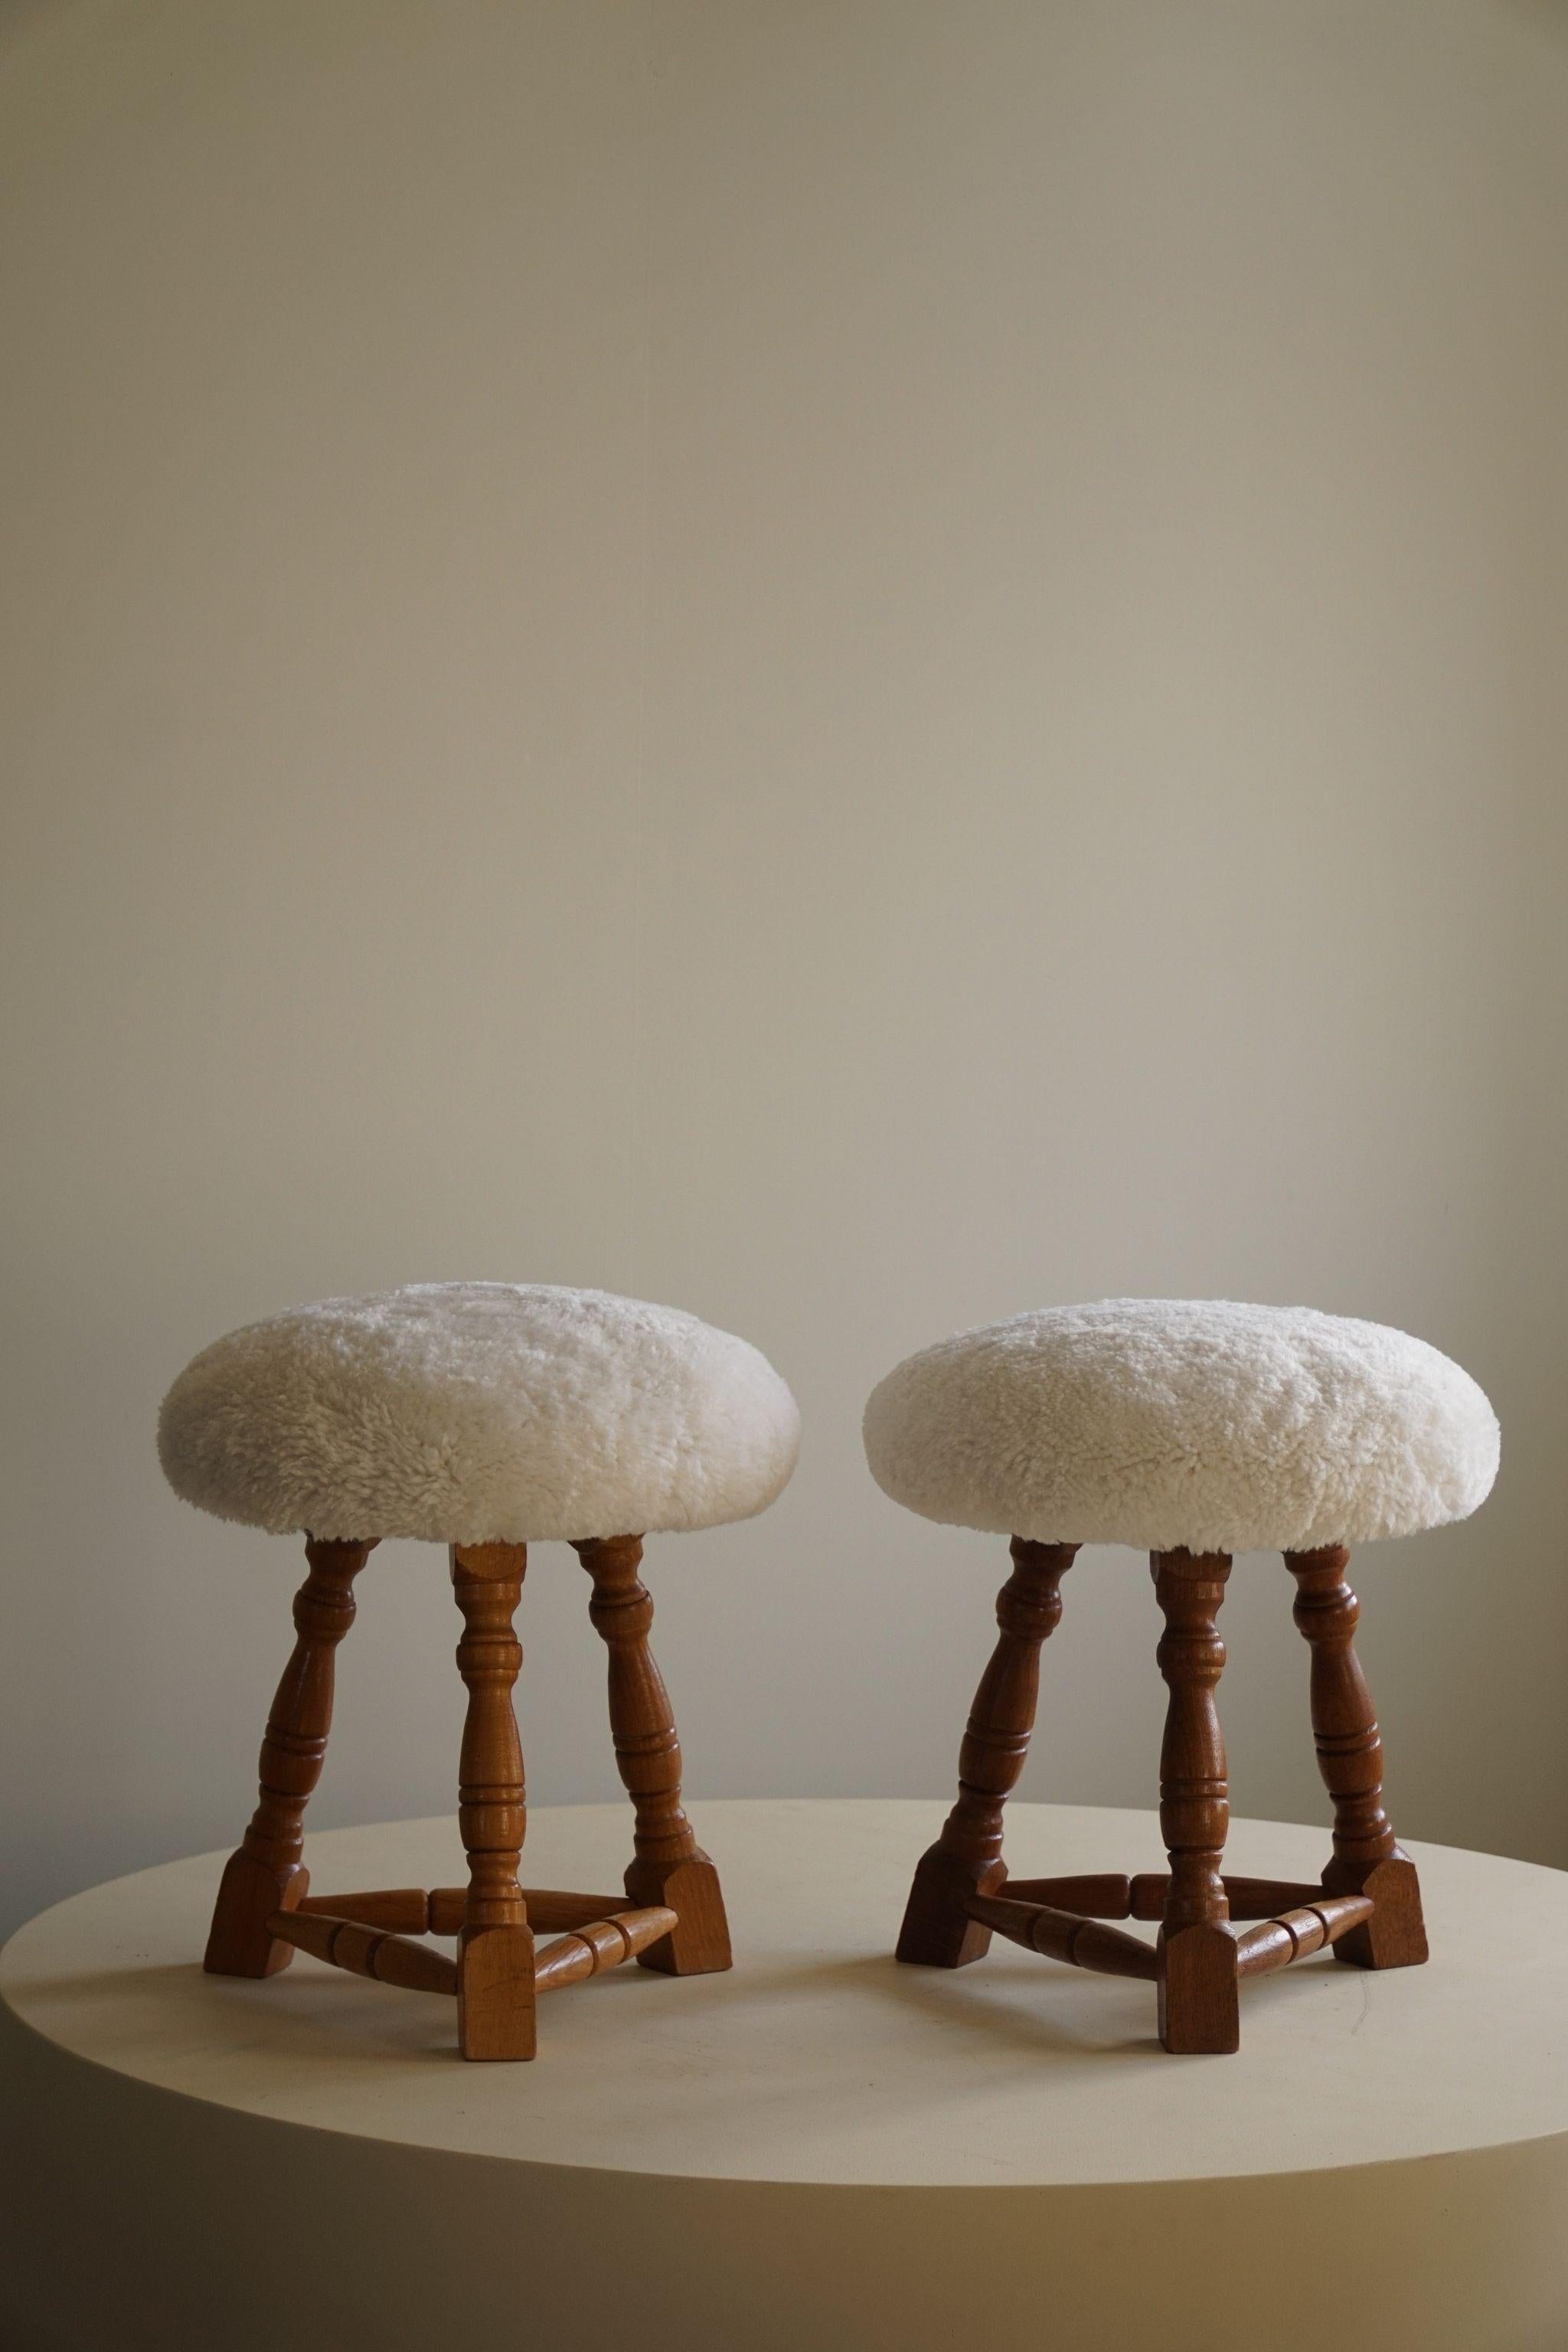 Danish Modern, A Pair of Tripod Stools, Reupholstered Seats in Lambswool, 1950s For Sale 6